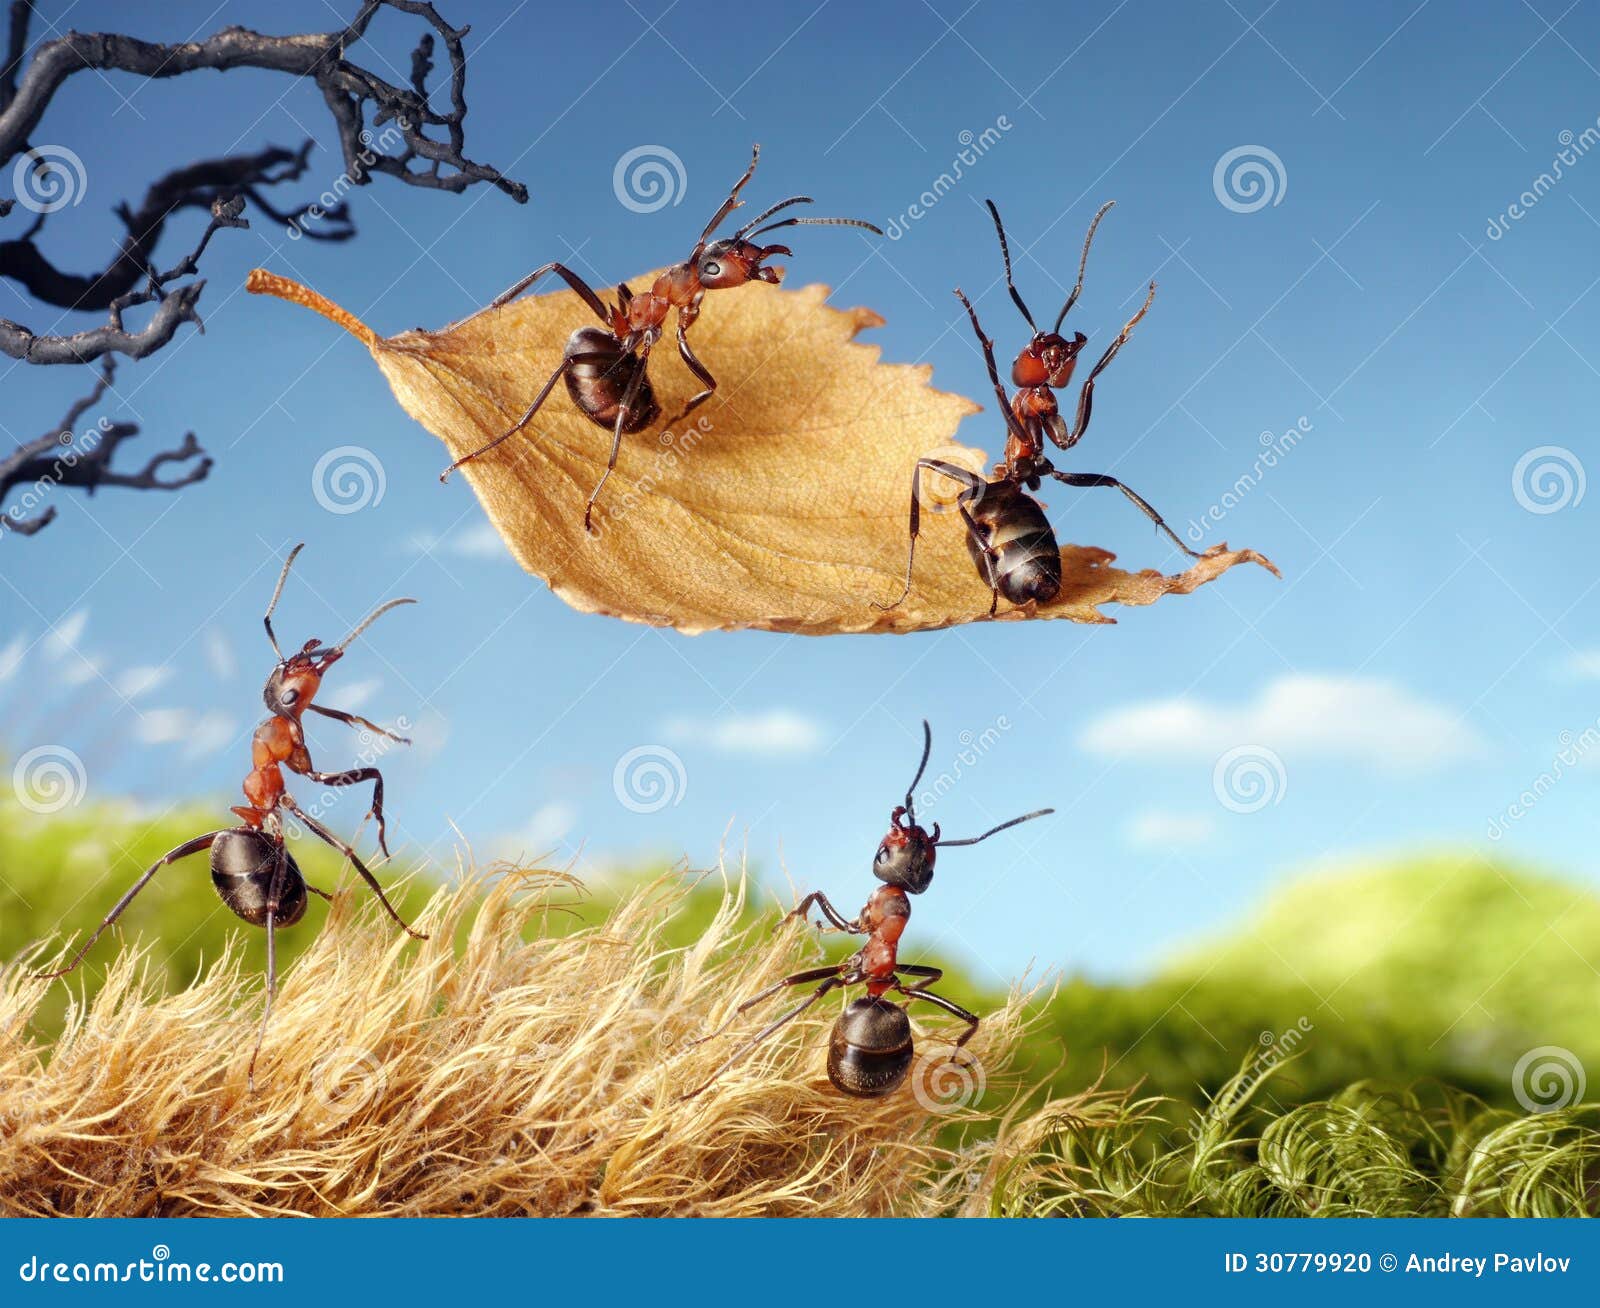 ants flying on leaf, ant tales